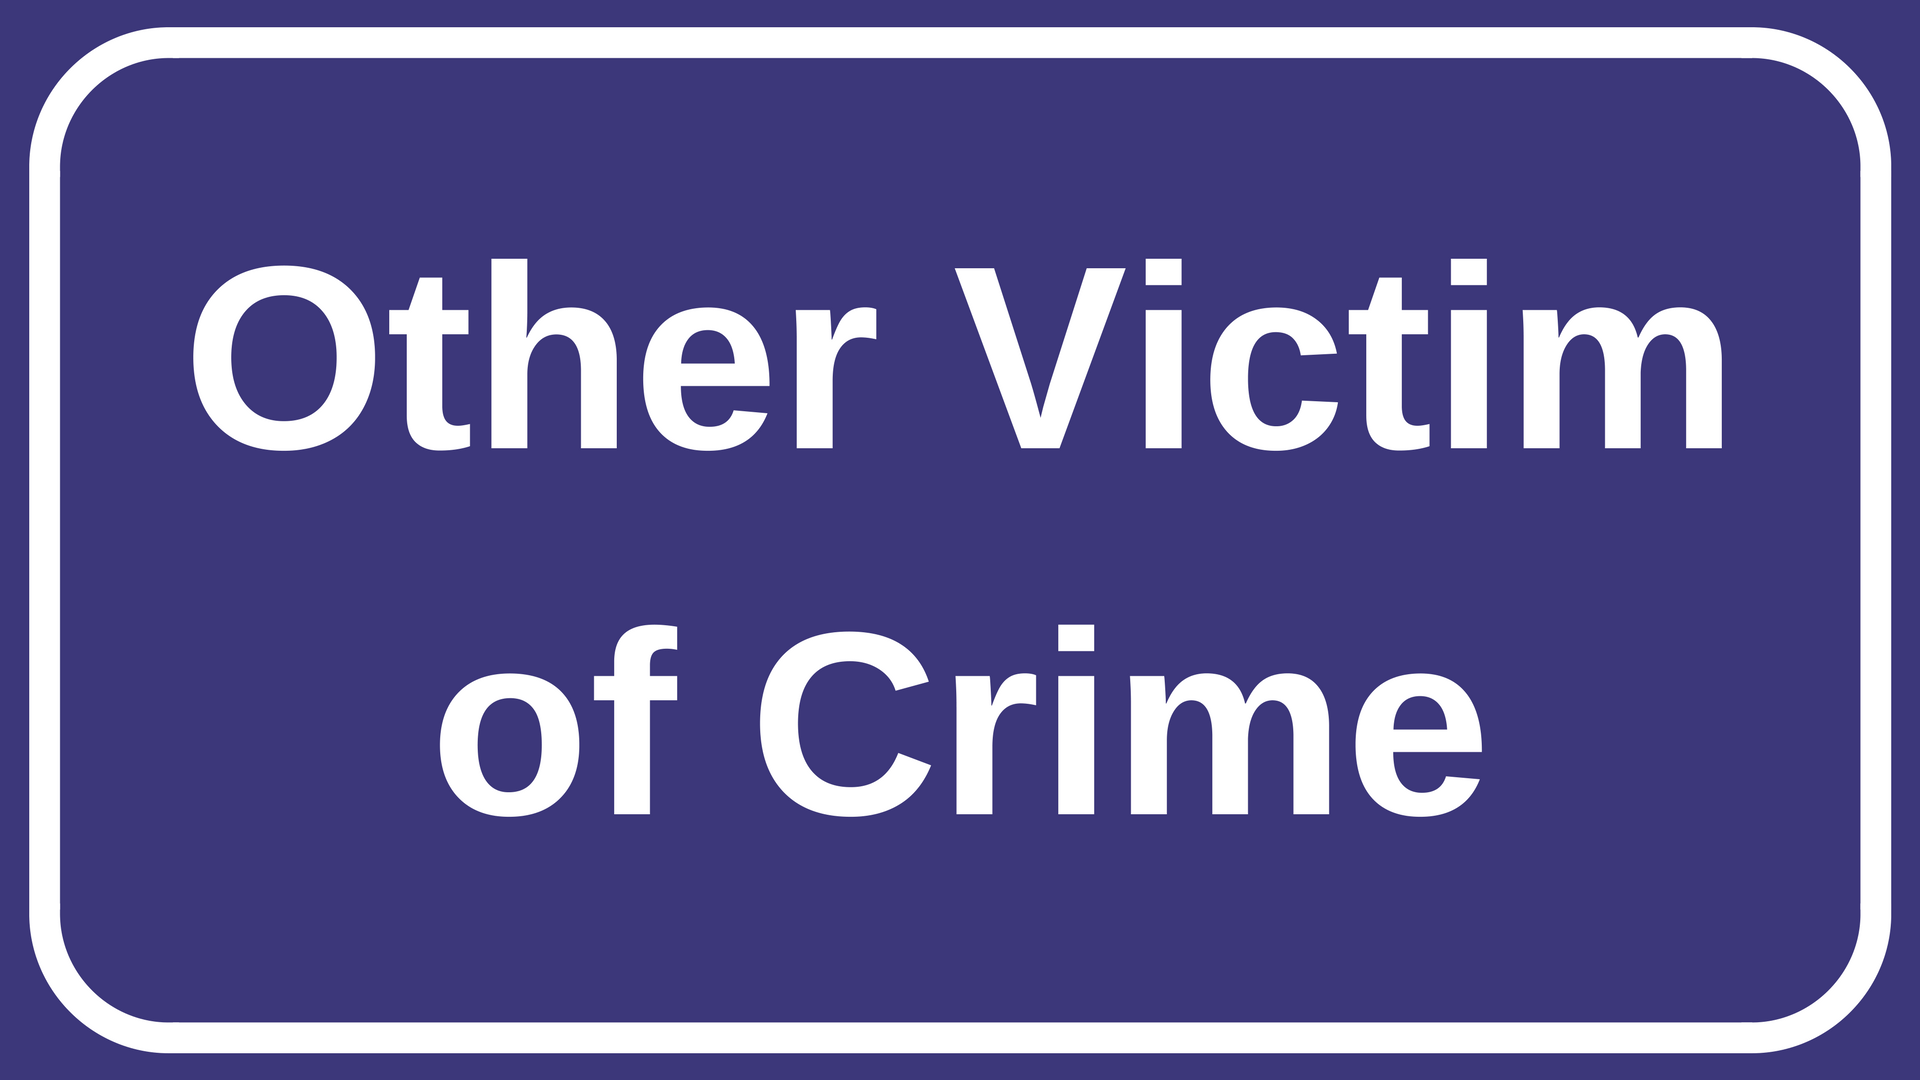 Other victim crime text banner